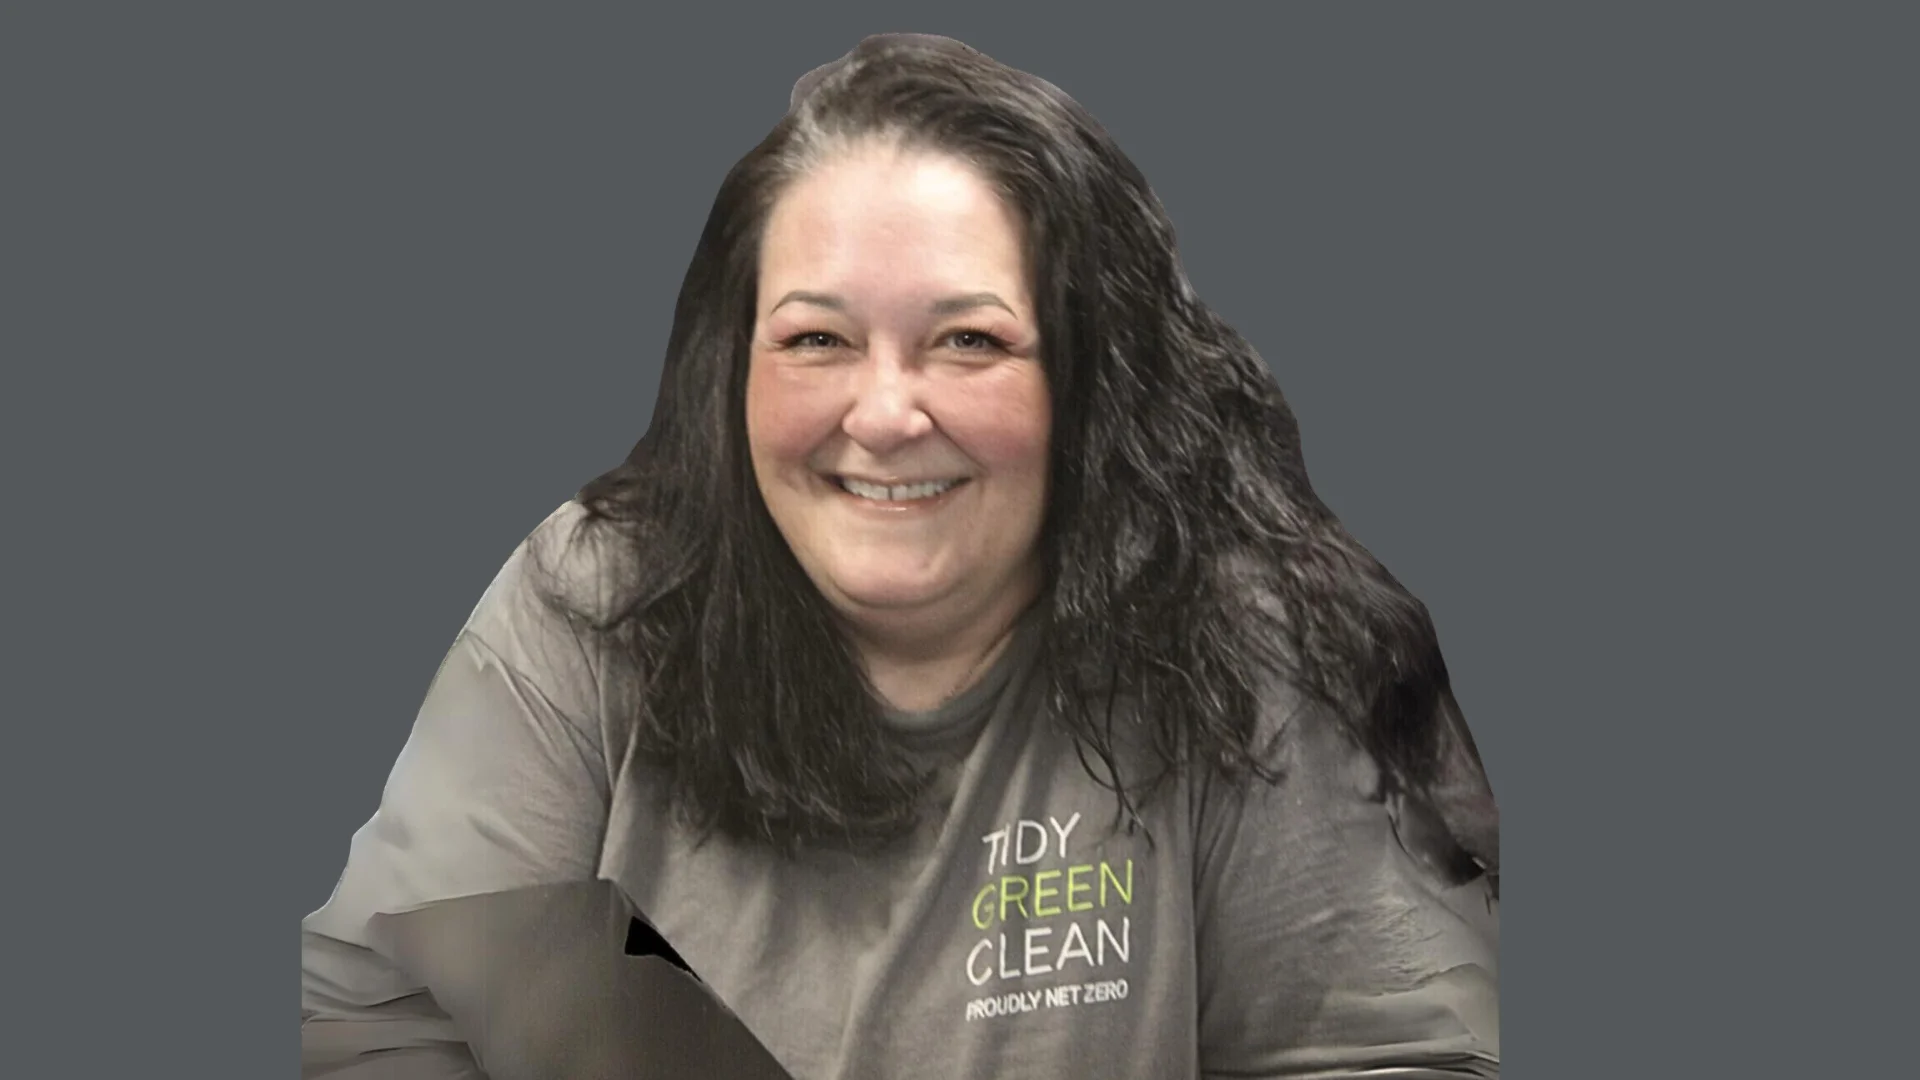 tidy green clean west operations manager rebecca